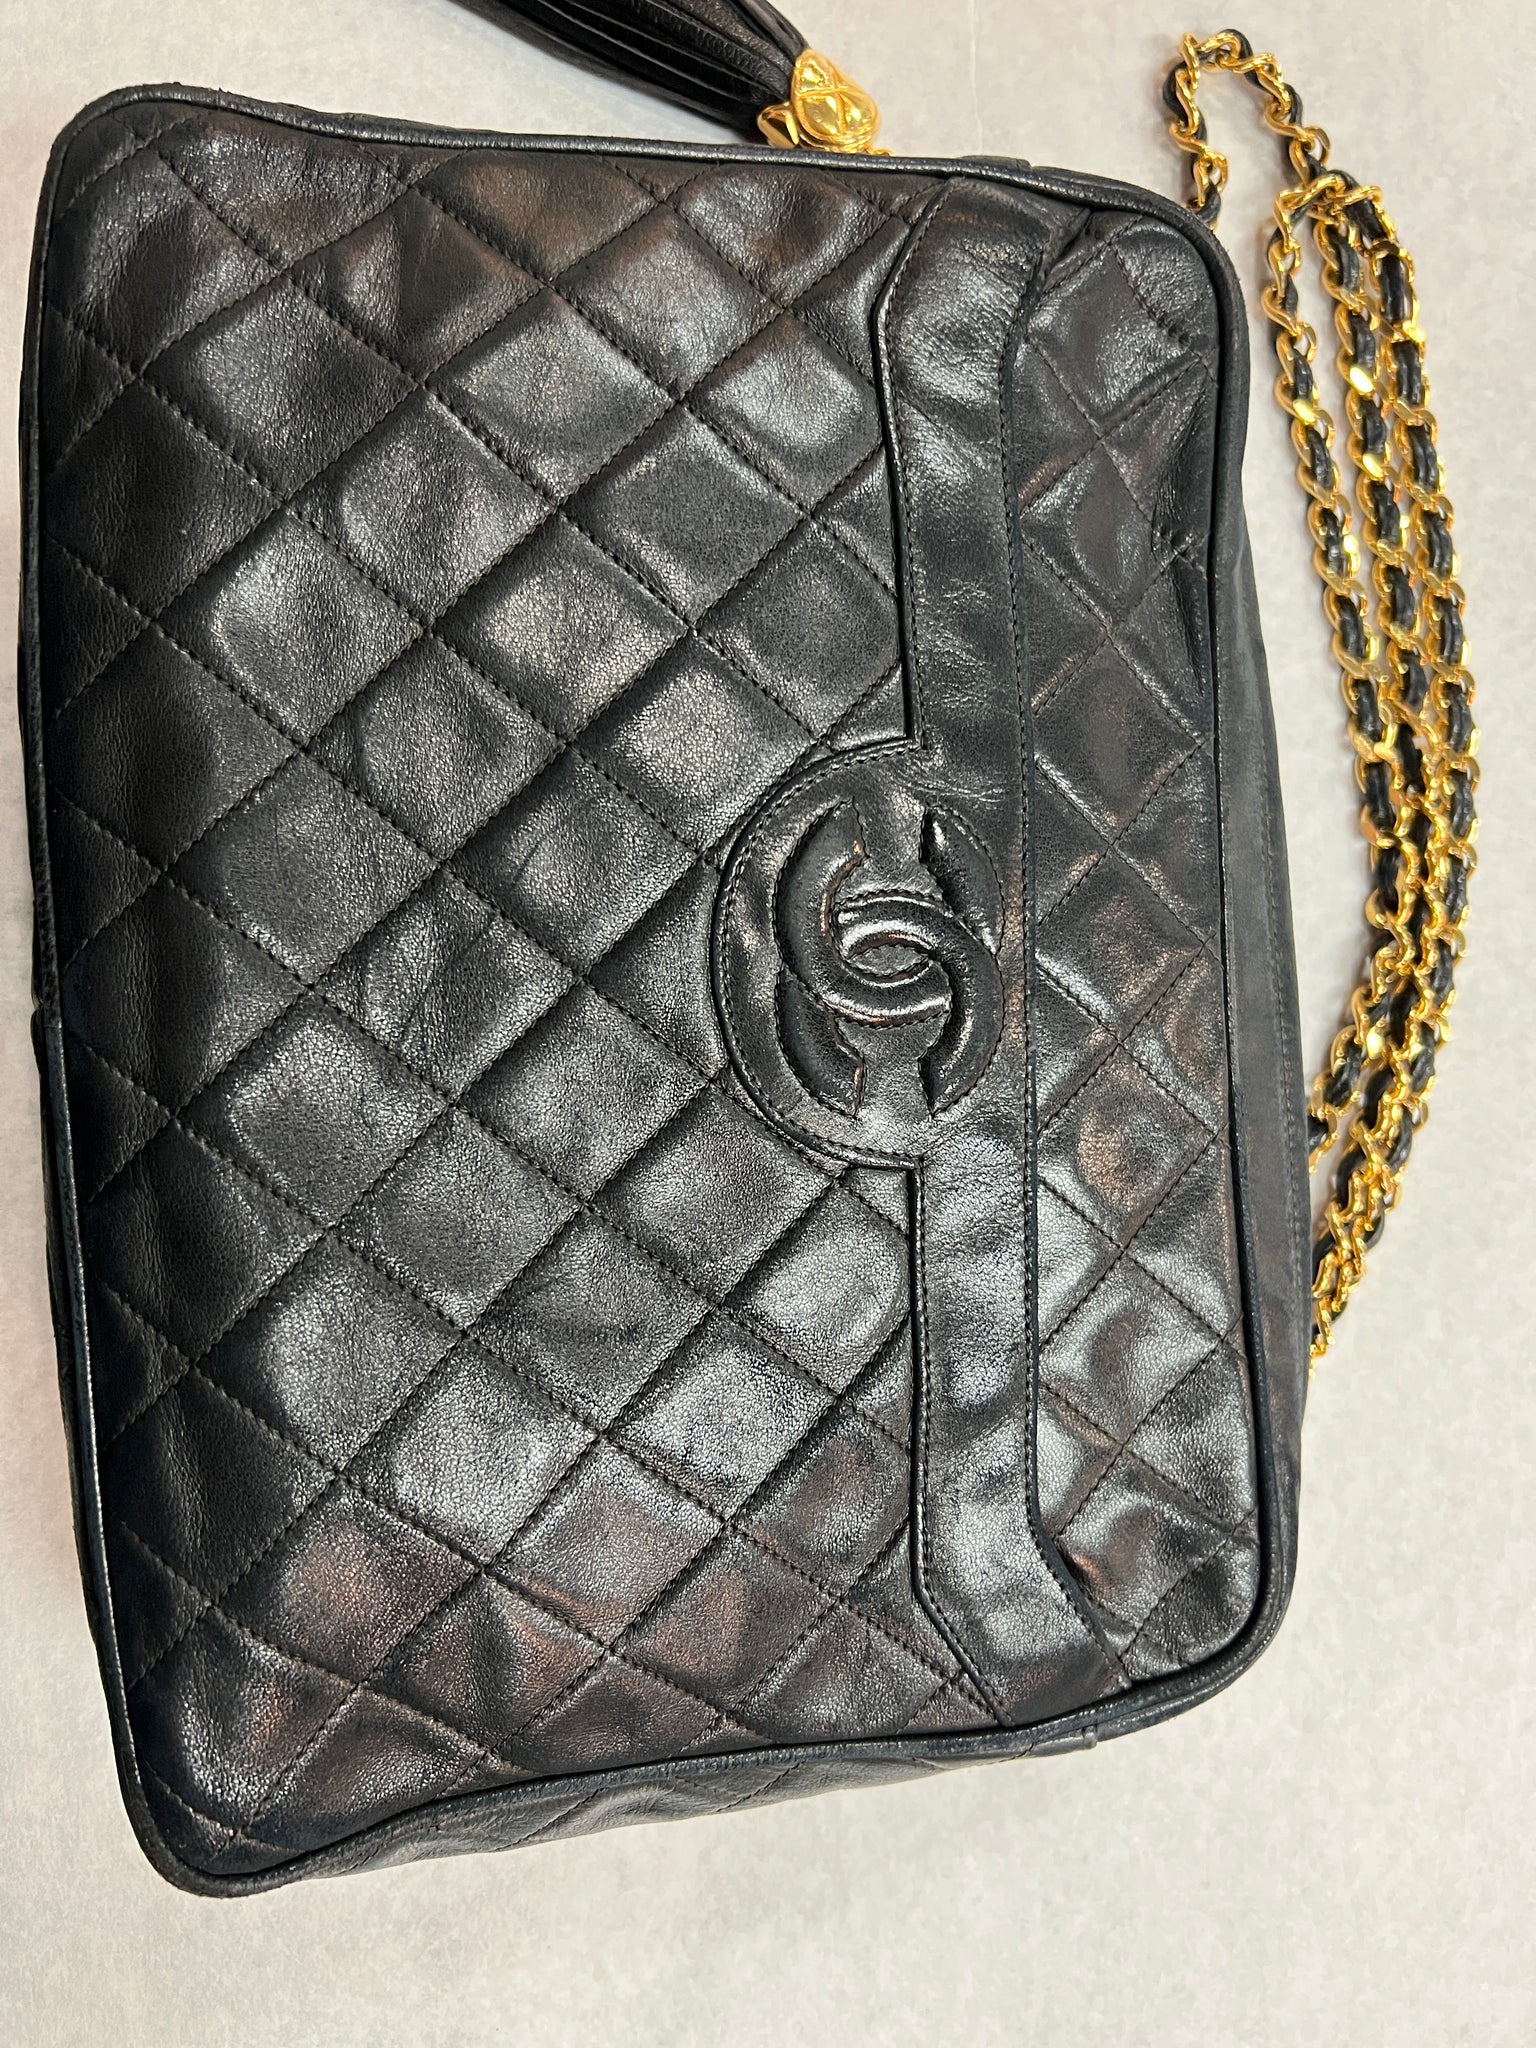 Authentic Chanel Lambskin Camera Bag